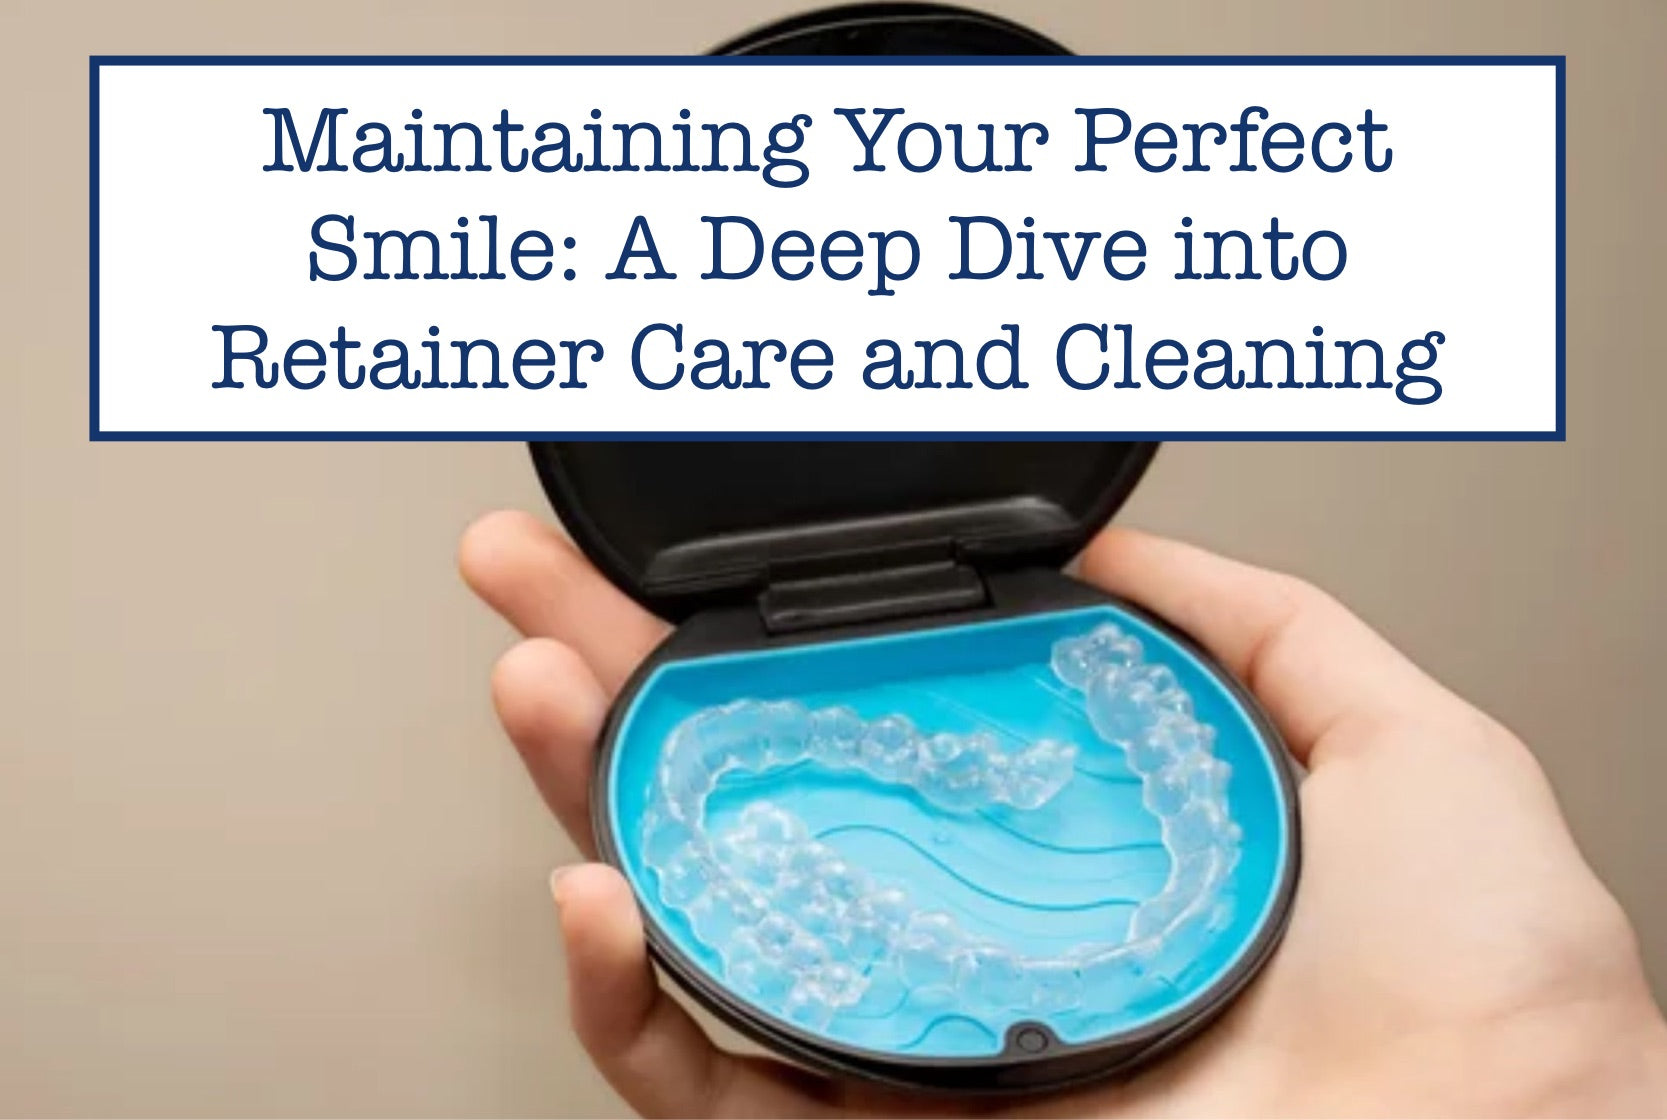 Maintaining Your Perfect Smile: A Deep Dive into Retainer Care and Cleaning